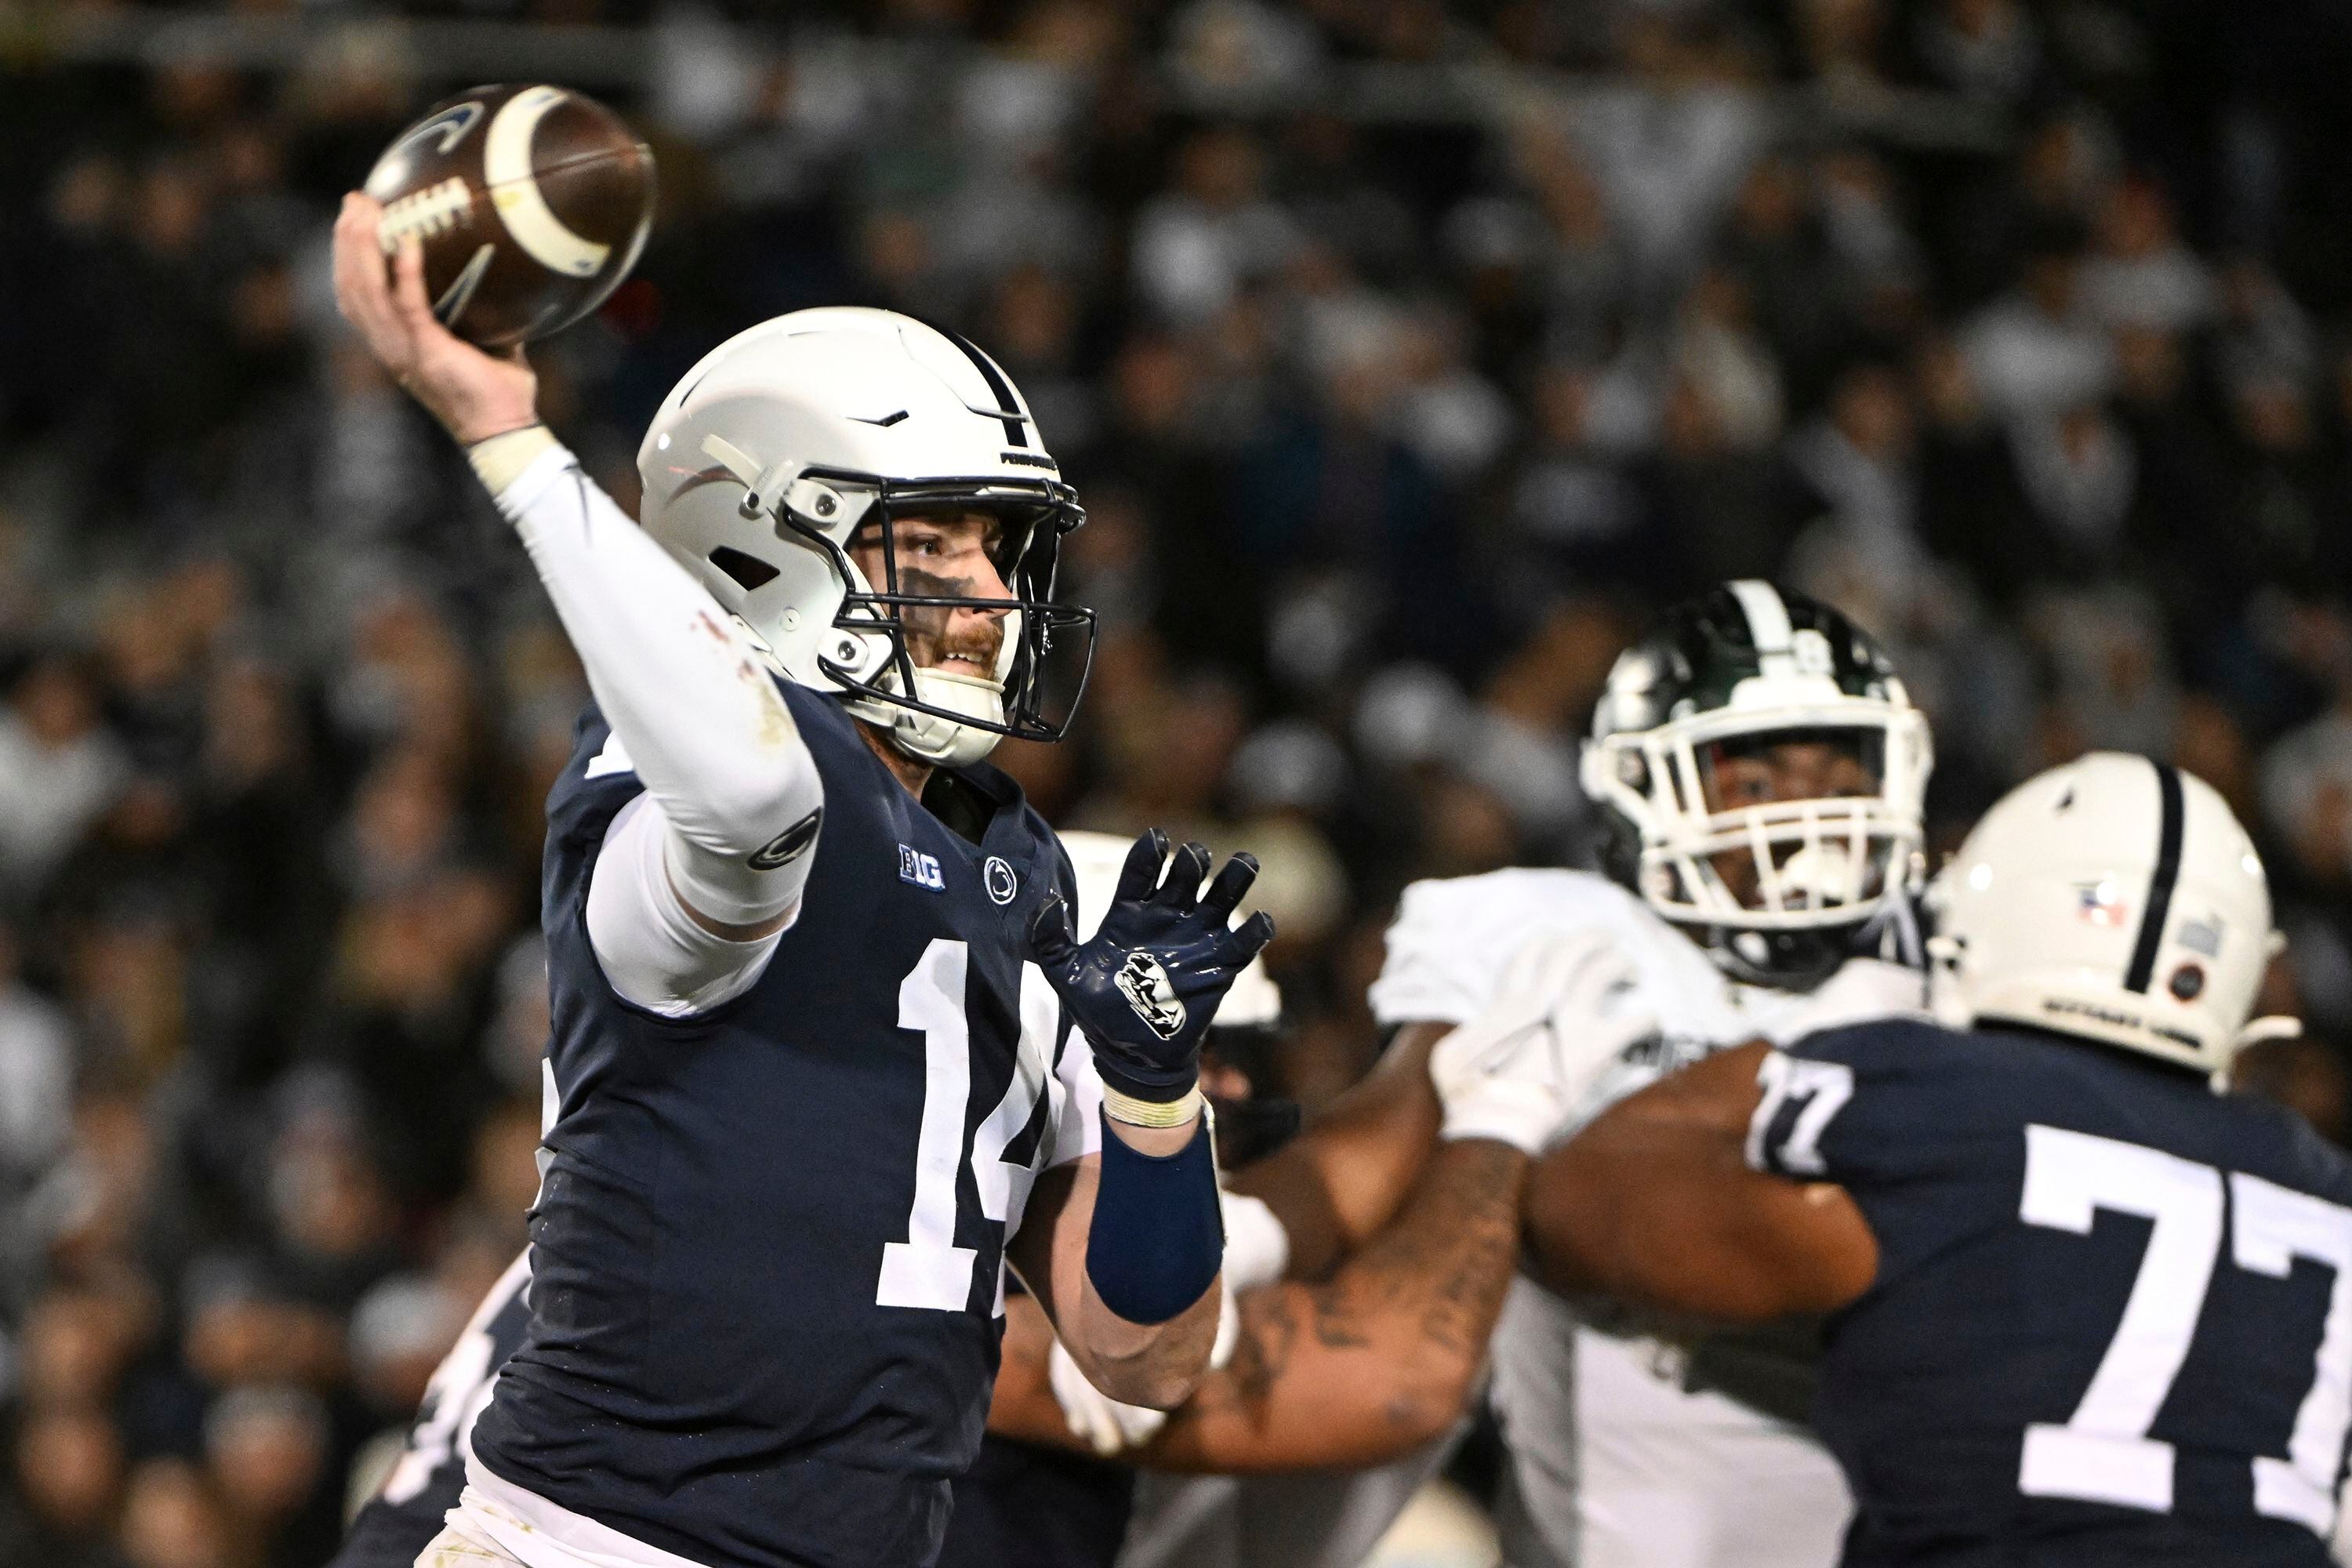 (Barry Reeger | AP) Penn State quarterback Sean Clifford (14) throws a pass during the second half of an NCAA college football game, against Michigan State, Saturday, Nov. 26, 2022, in State College, Pa.